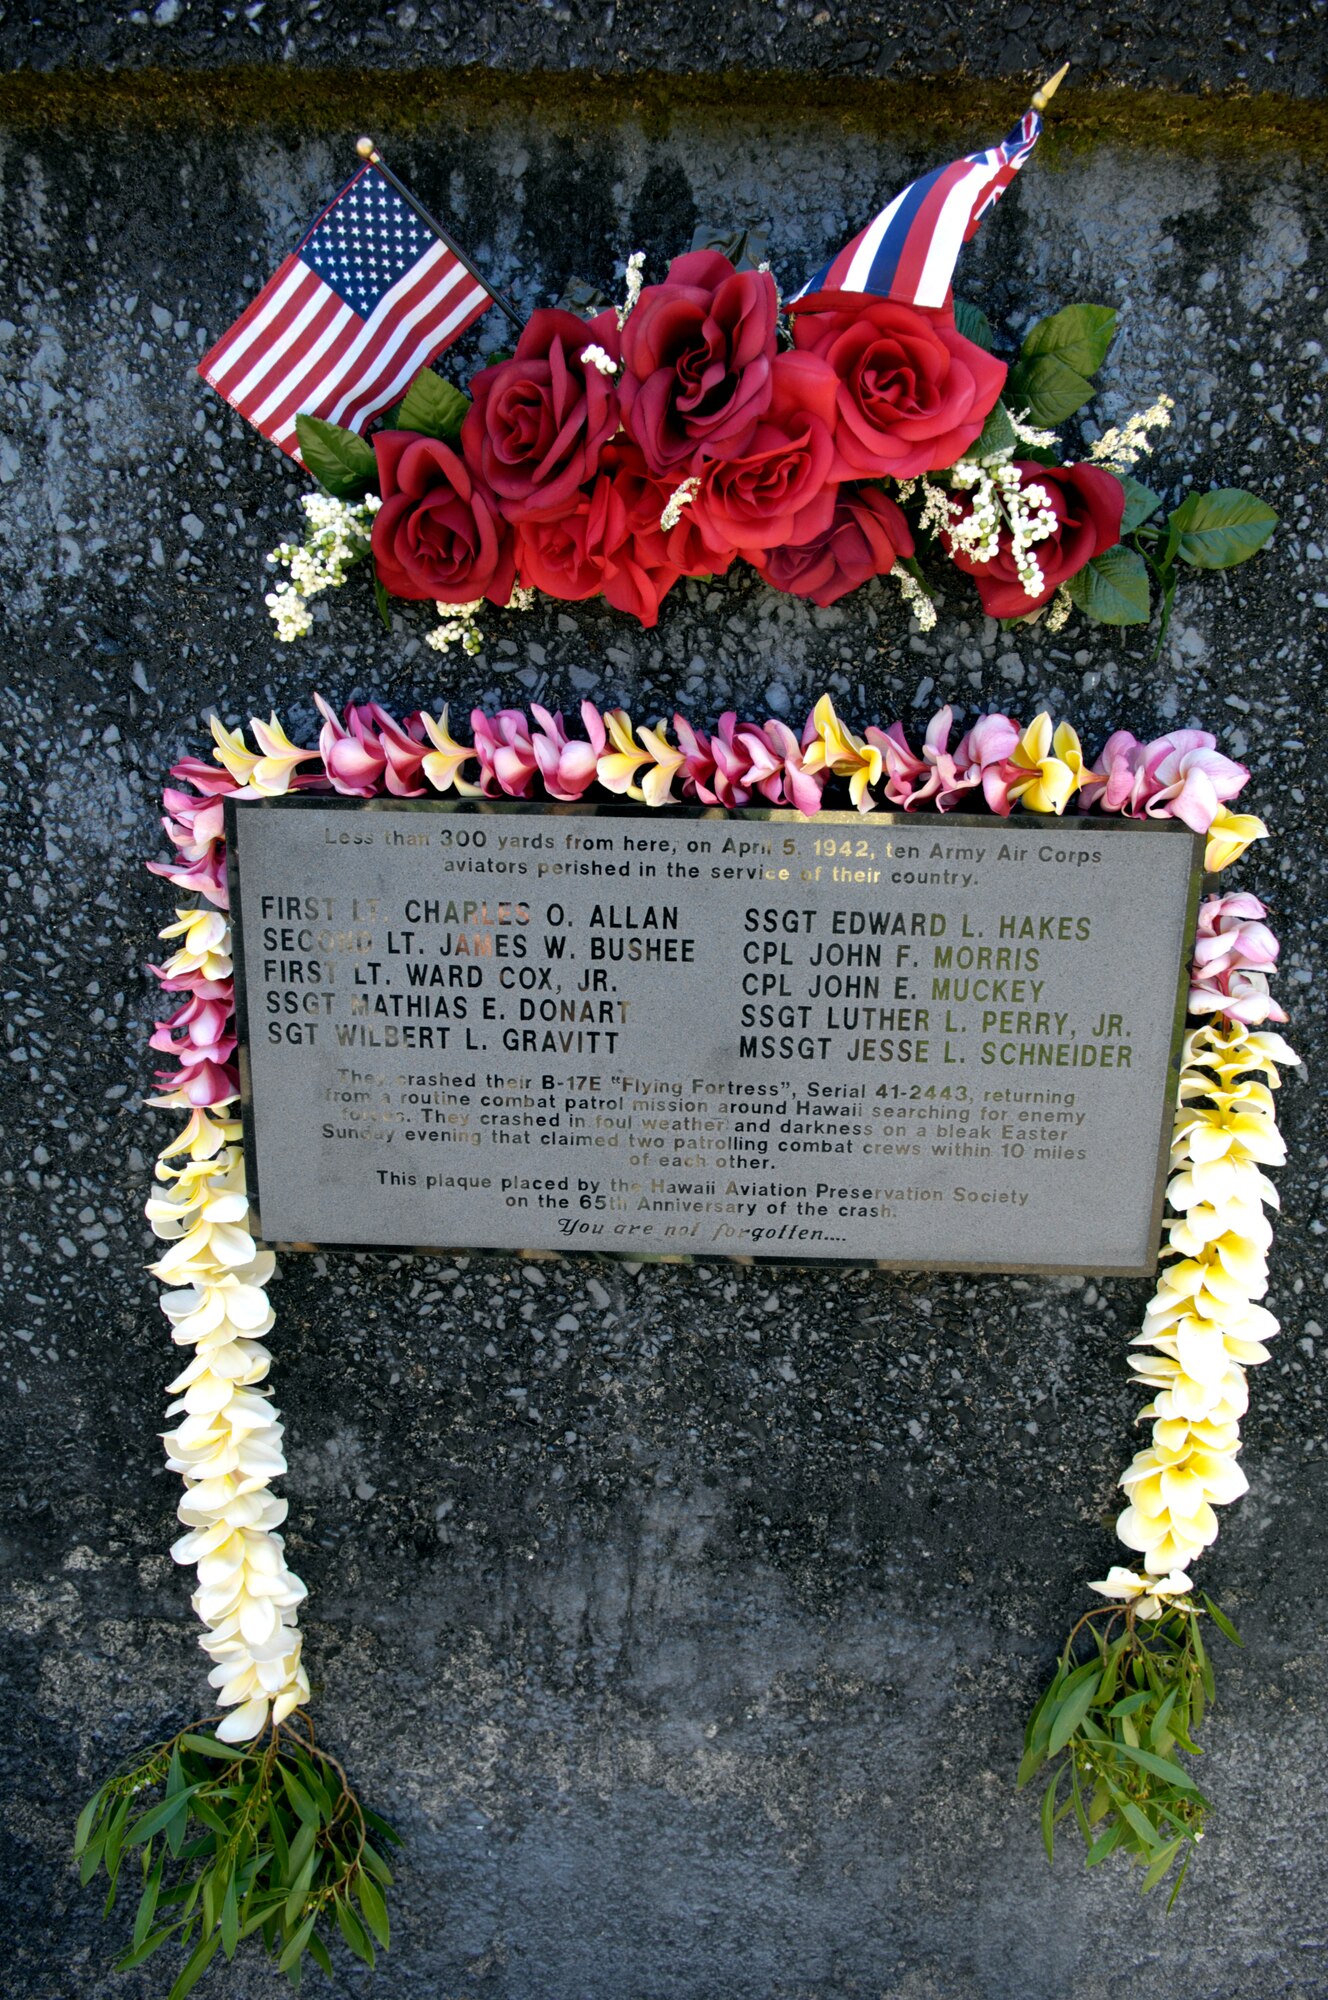 A plaque honoring 10 crew members of a B-17E Flying Fortress sits about 300 yards from the crash site on Nu'uanu Pali Lookout, Hawaii April 5, 2007. Airmen from Hickam Air Force Base and members of Hawaii Aviation Preservation Society held a memorial and dedicated the plaque airmen that crashed into the cliffs of Mt. Keahiakahoe 65 years ago. (U.S. Air Force photo/ Tech. Sgt. Shane A. Cuomo)